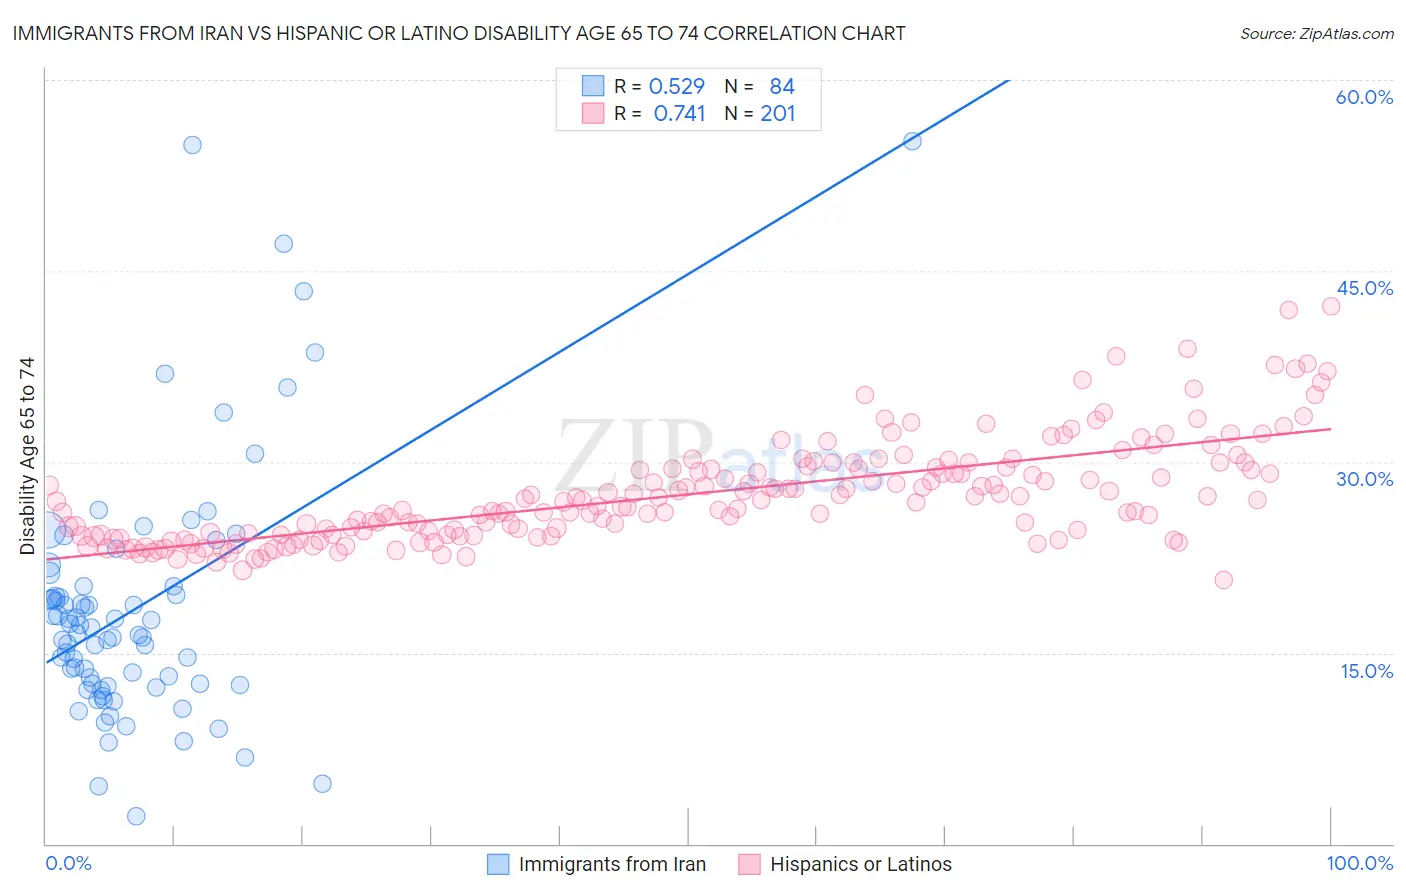 Immigrants from Iran vs Hispanic or Latino Disability Age 65 to 74